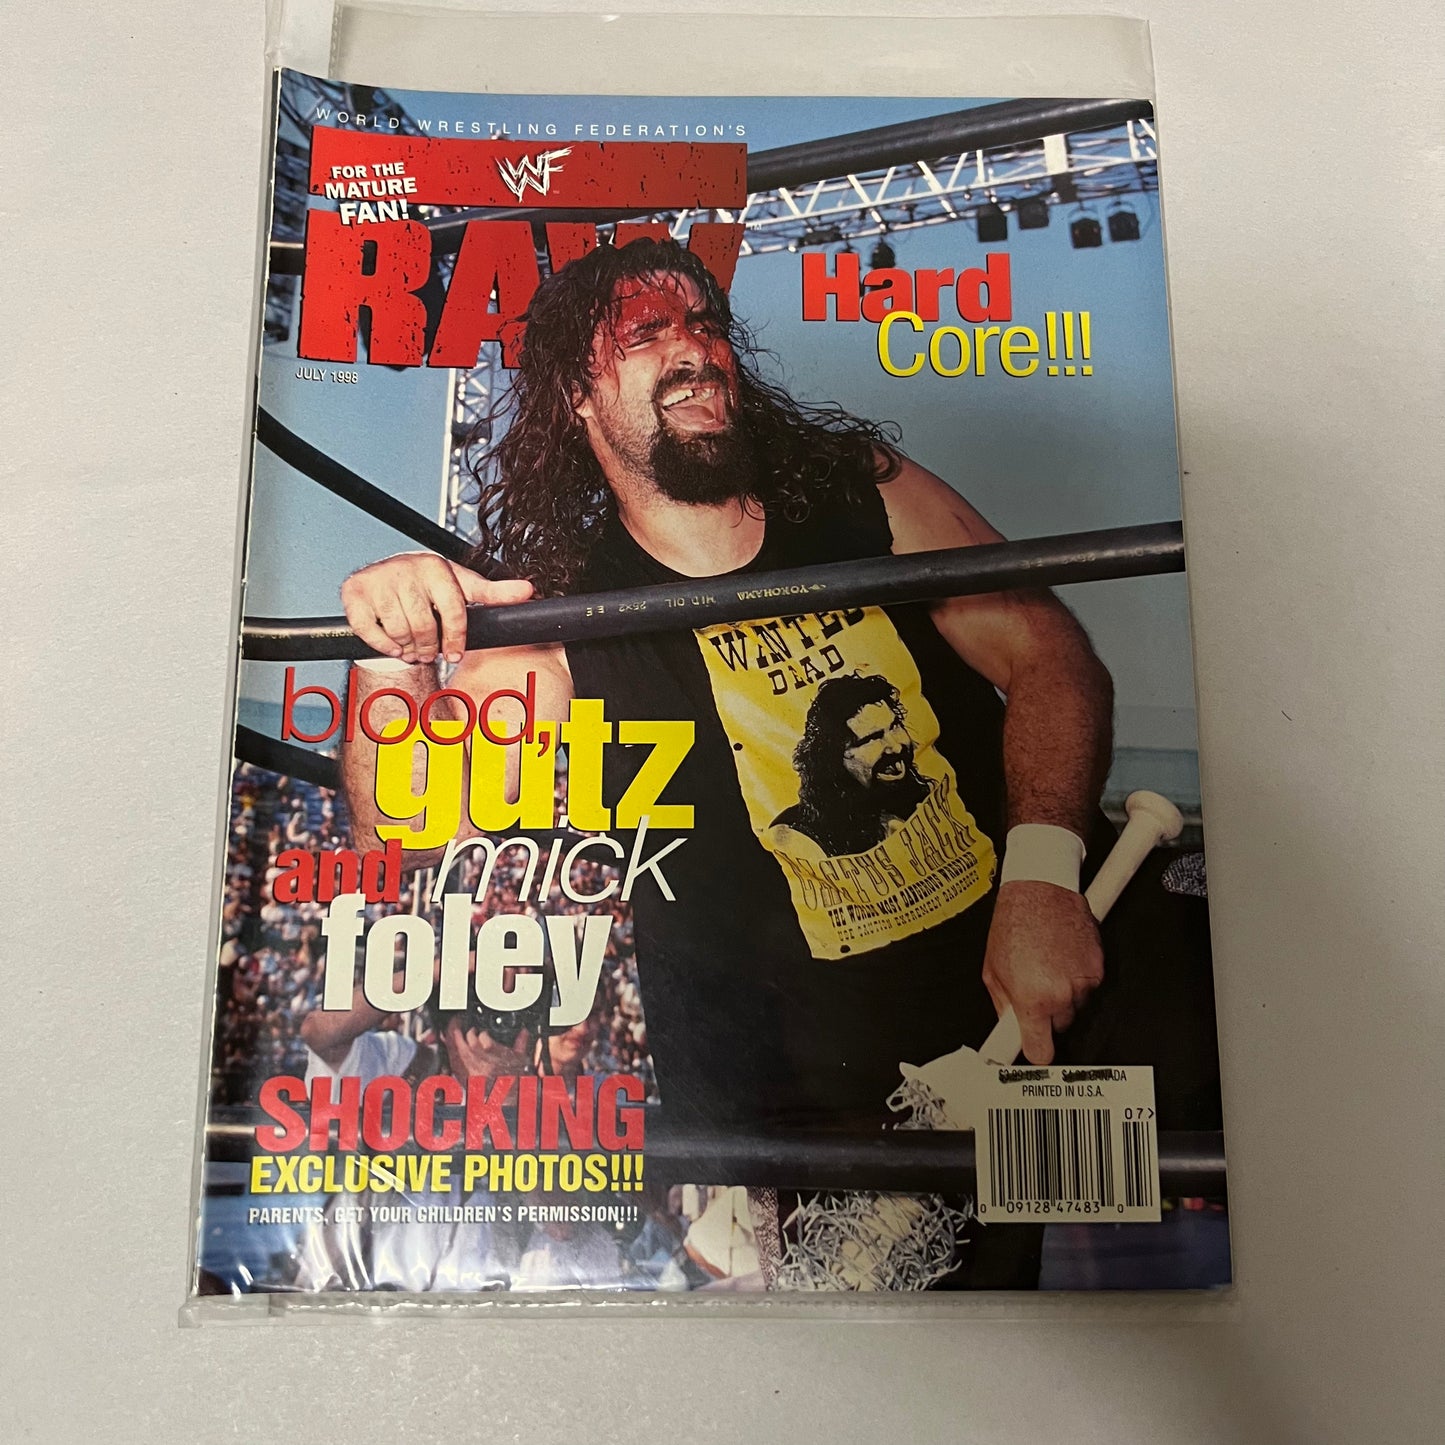 Blood and Guts Mick Foley - WWE WWF Magazine Retro Collectable Authentic